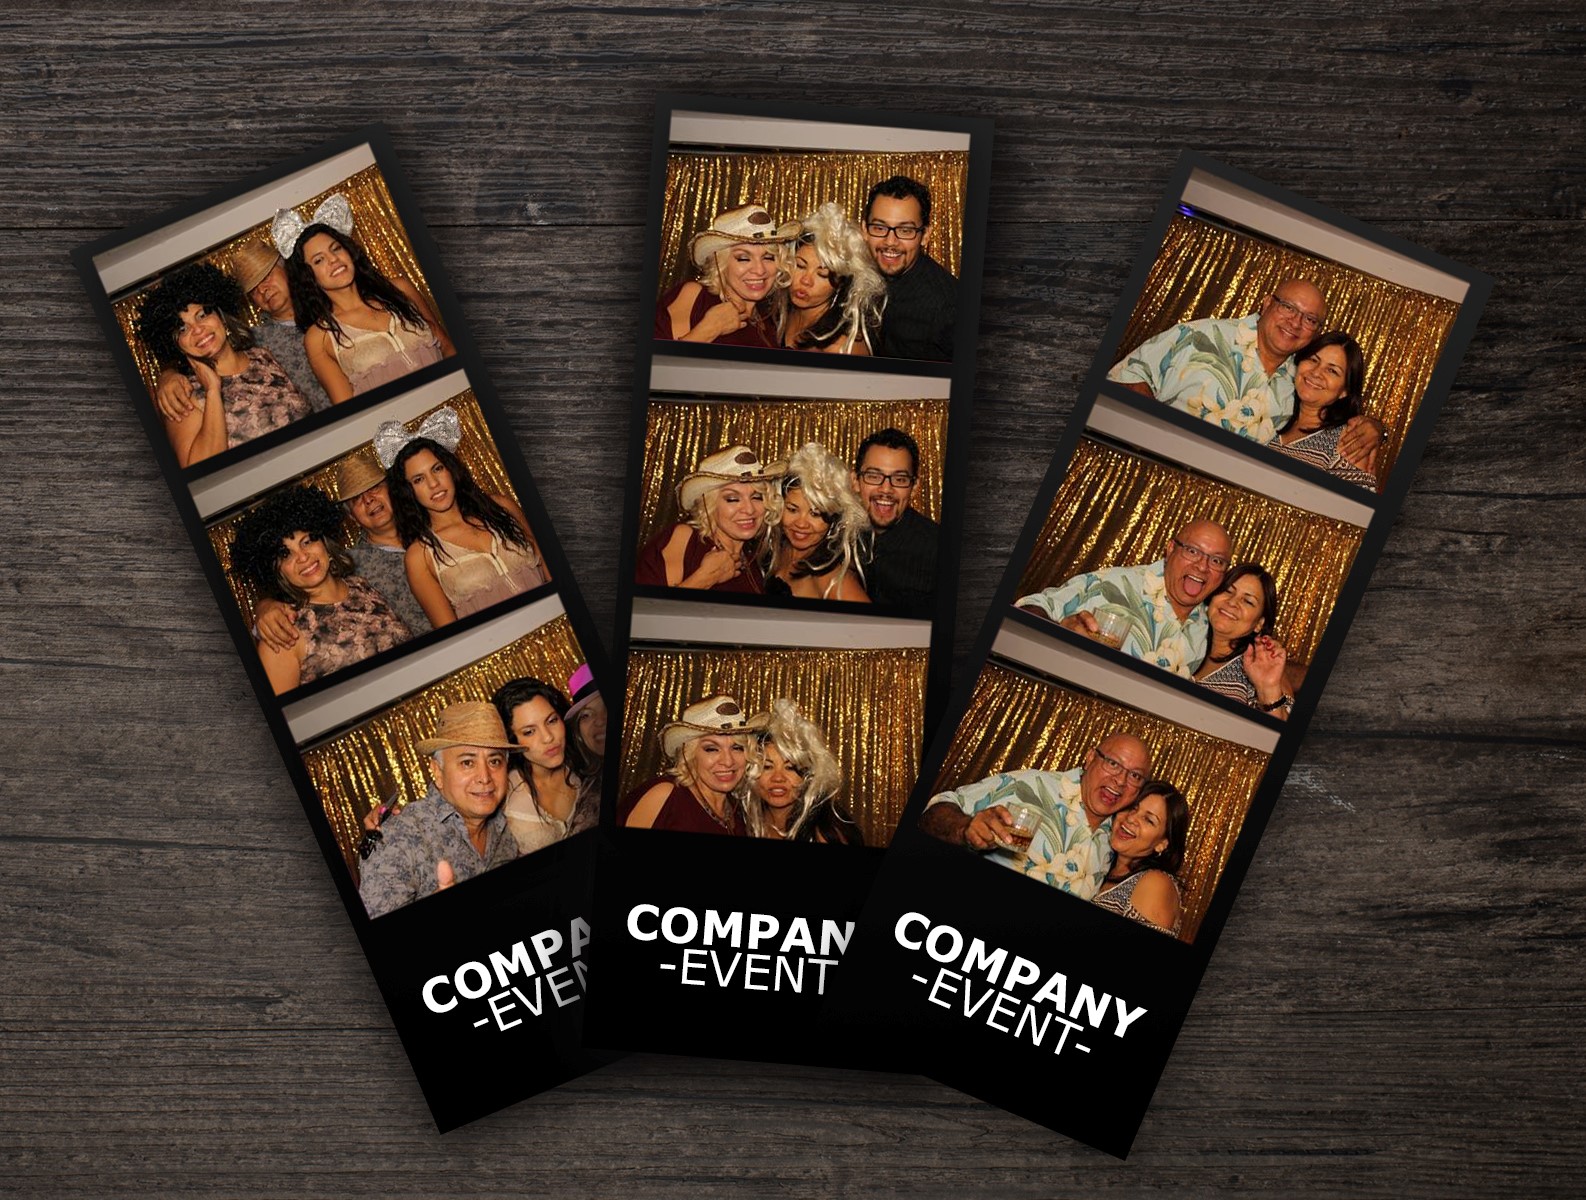 Party Photo Booth Rental